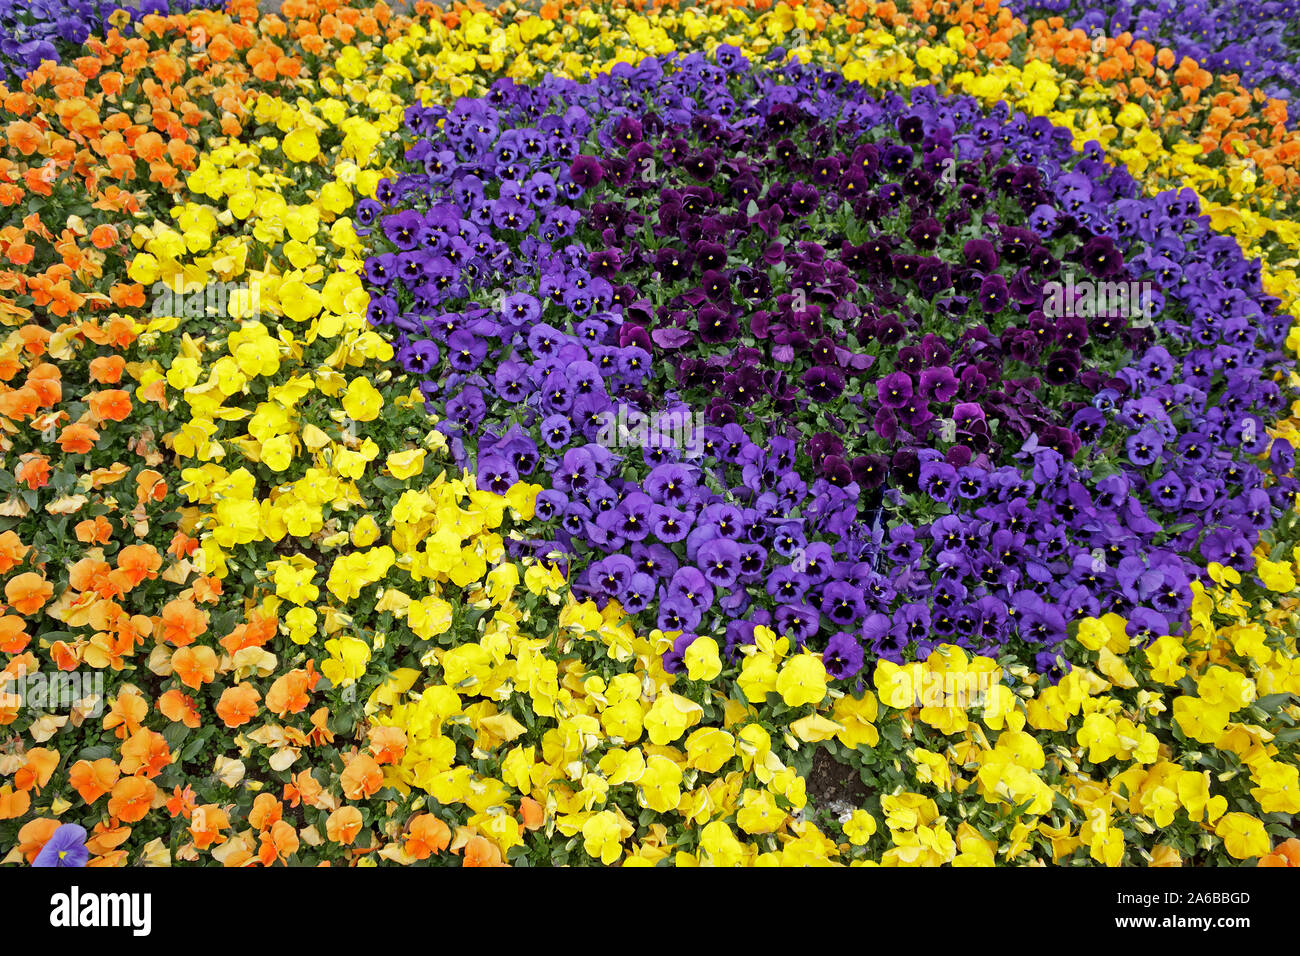 A colorful flower bed made of pansies. Stock Photo